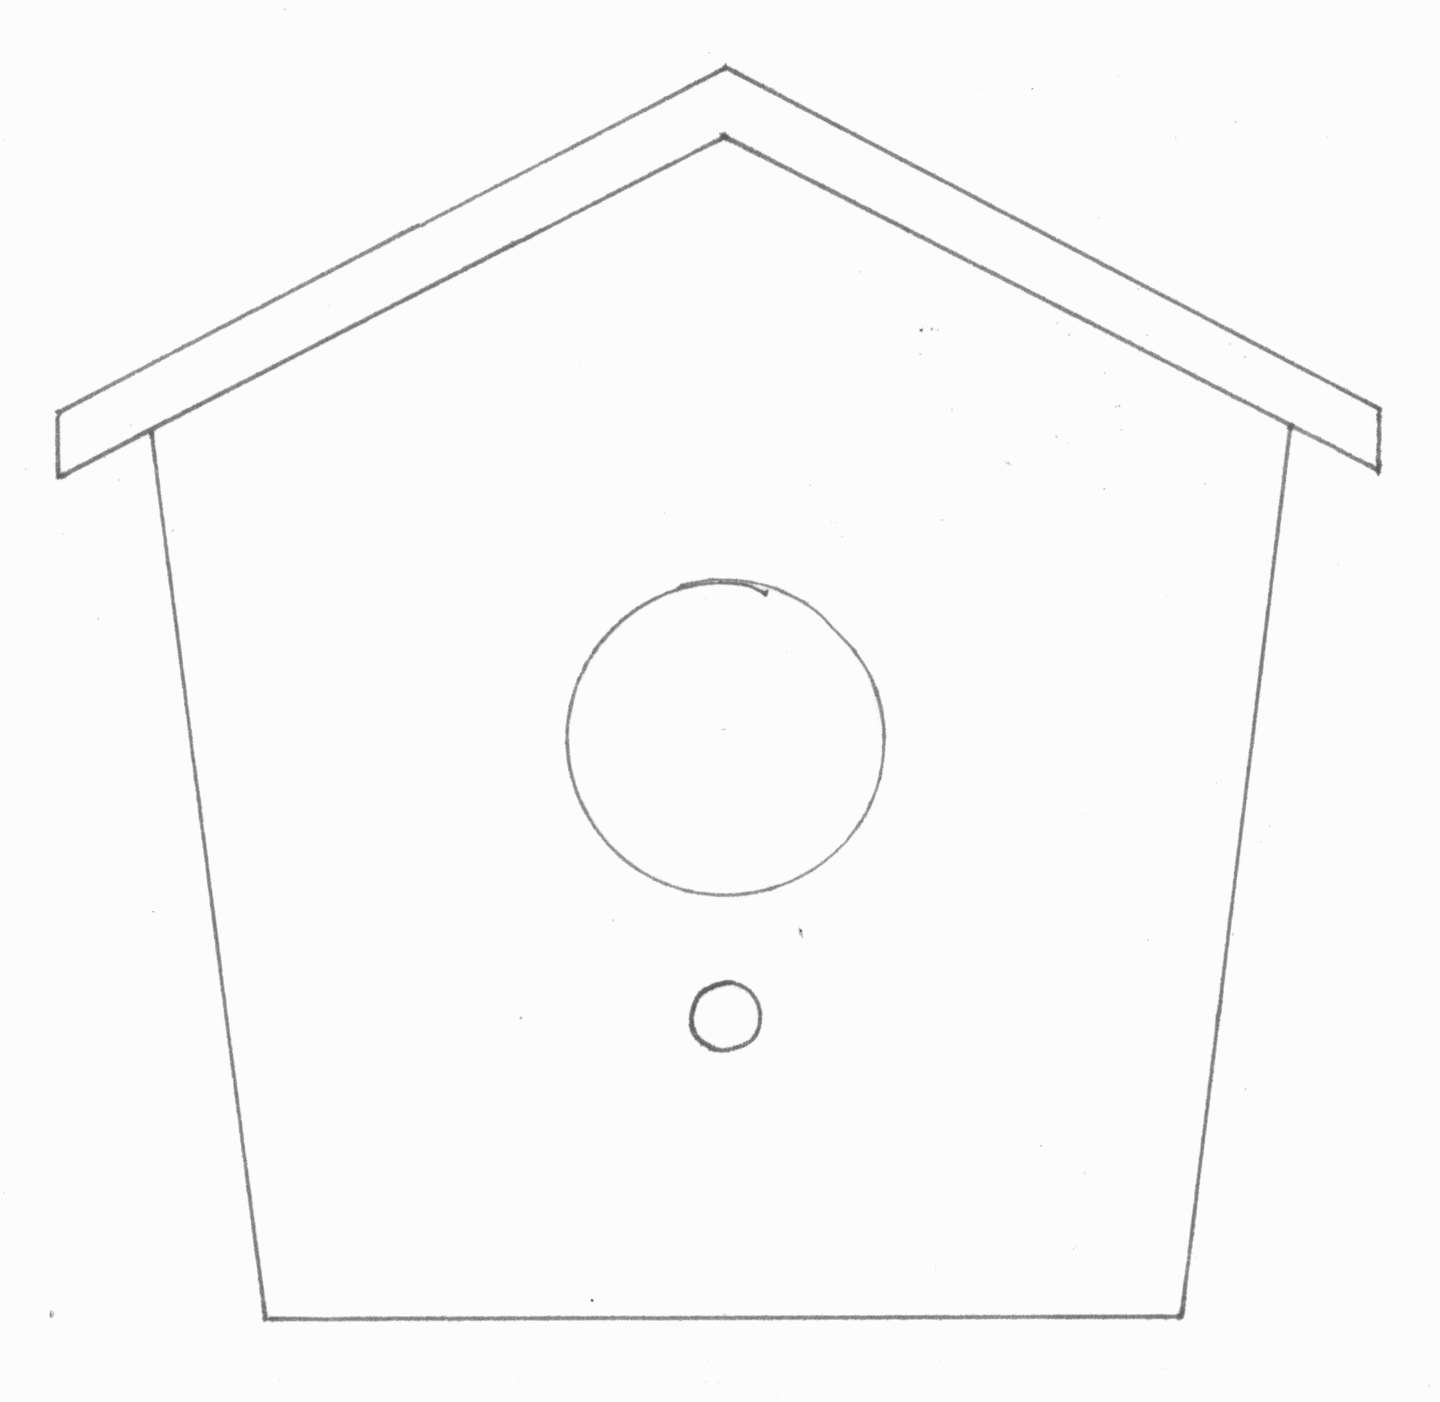 storage-shed-siding-options-birdhouse-templates-free-gambrel-roof